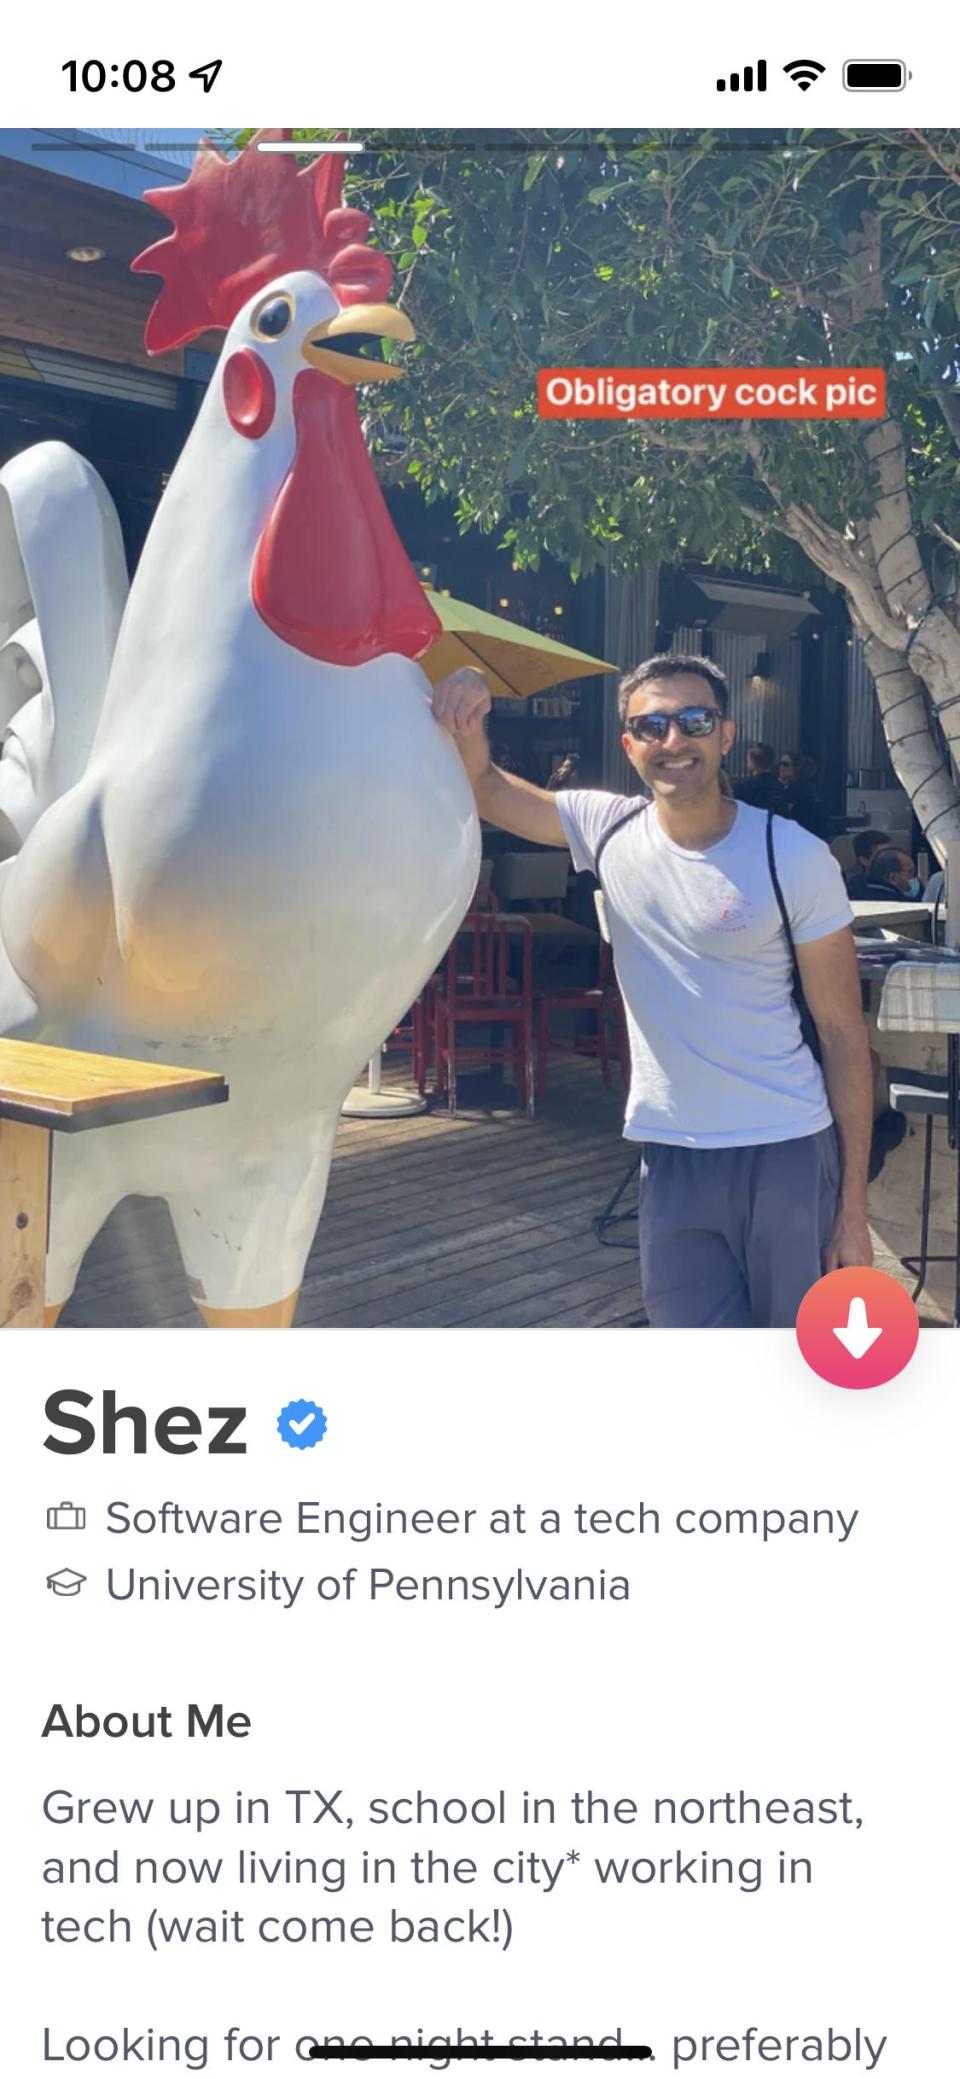 Shez shared his Tinder profile with dating expert Sara Tick, who gave him suggestions for updating it.